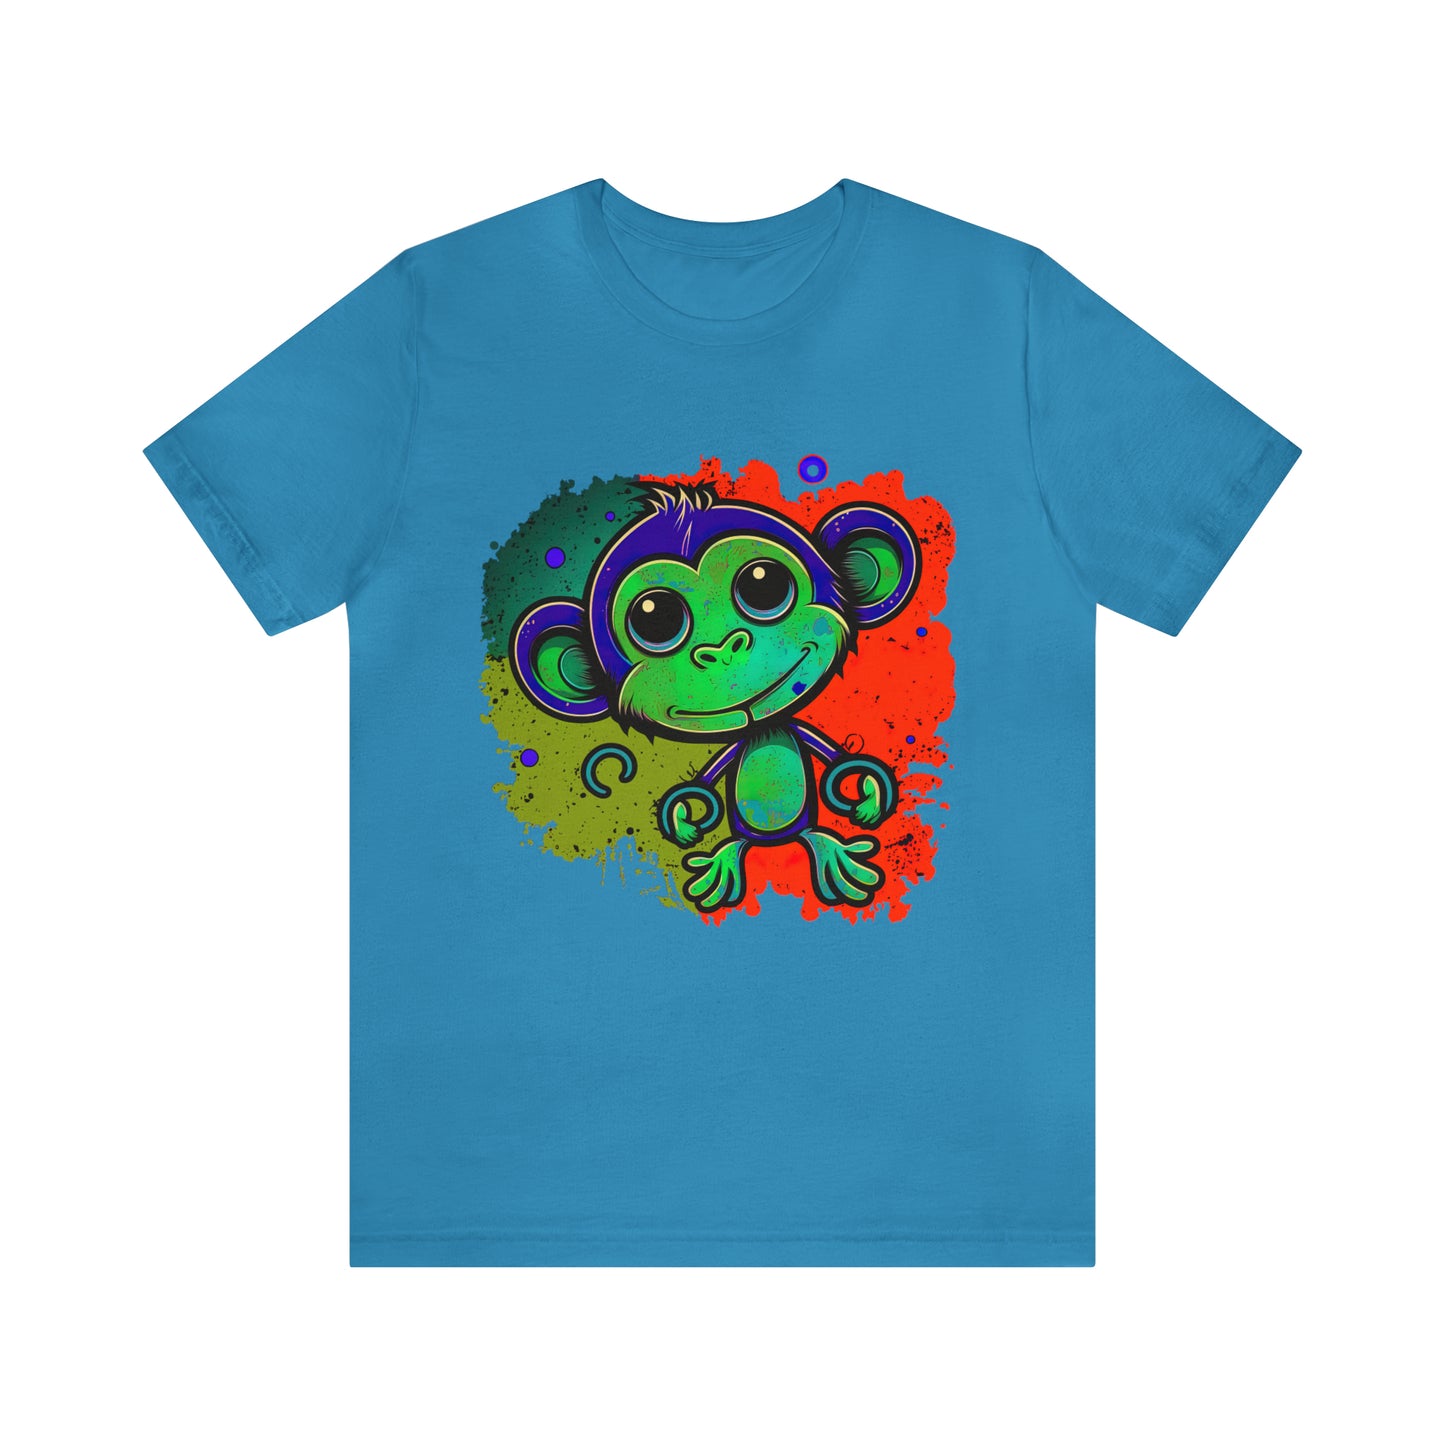 psychedelicBRANDz's Vibrant Forest Frolic featuring a monkey in a psychedelic design on an aqua shirt